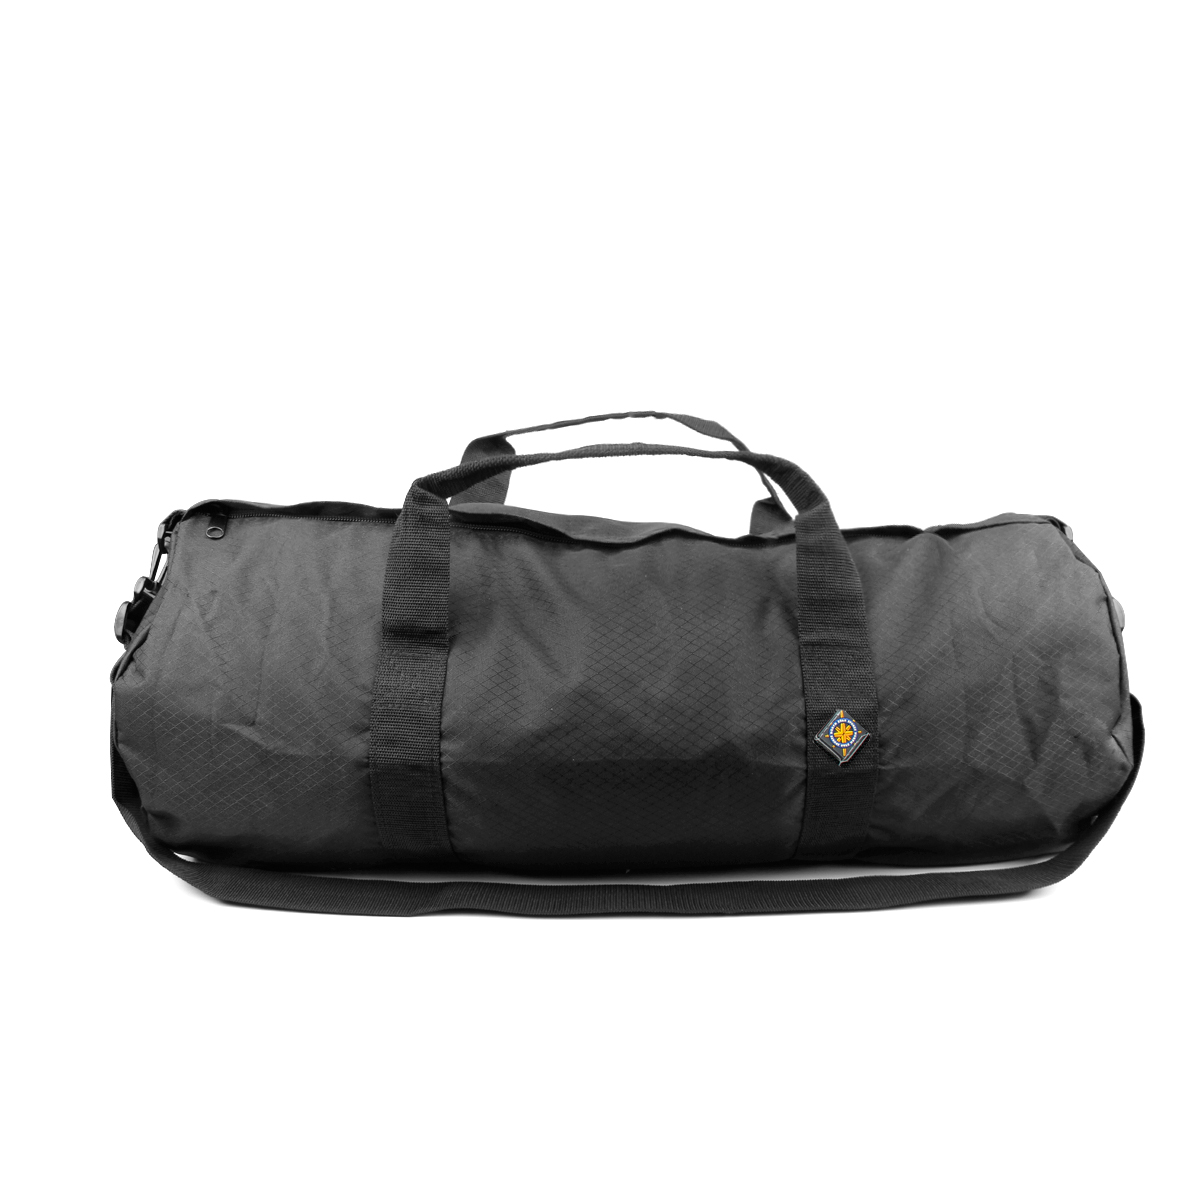 DuraSPORT Rugged Luggage Duffle Bag with Carrying Handles and Shoulder Strap | eBay